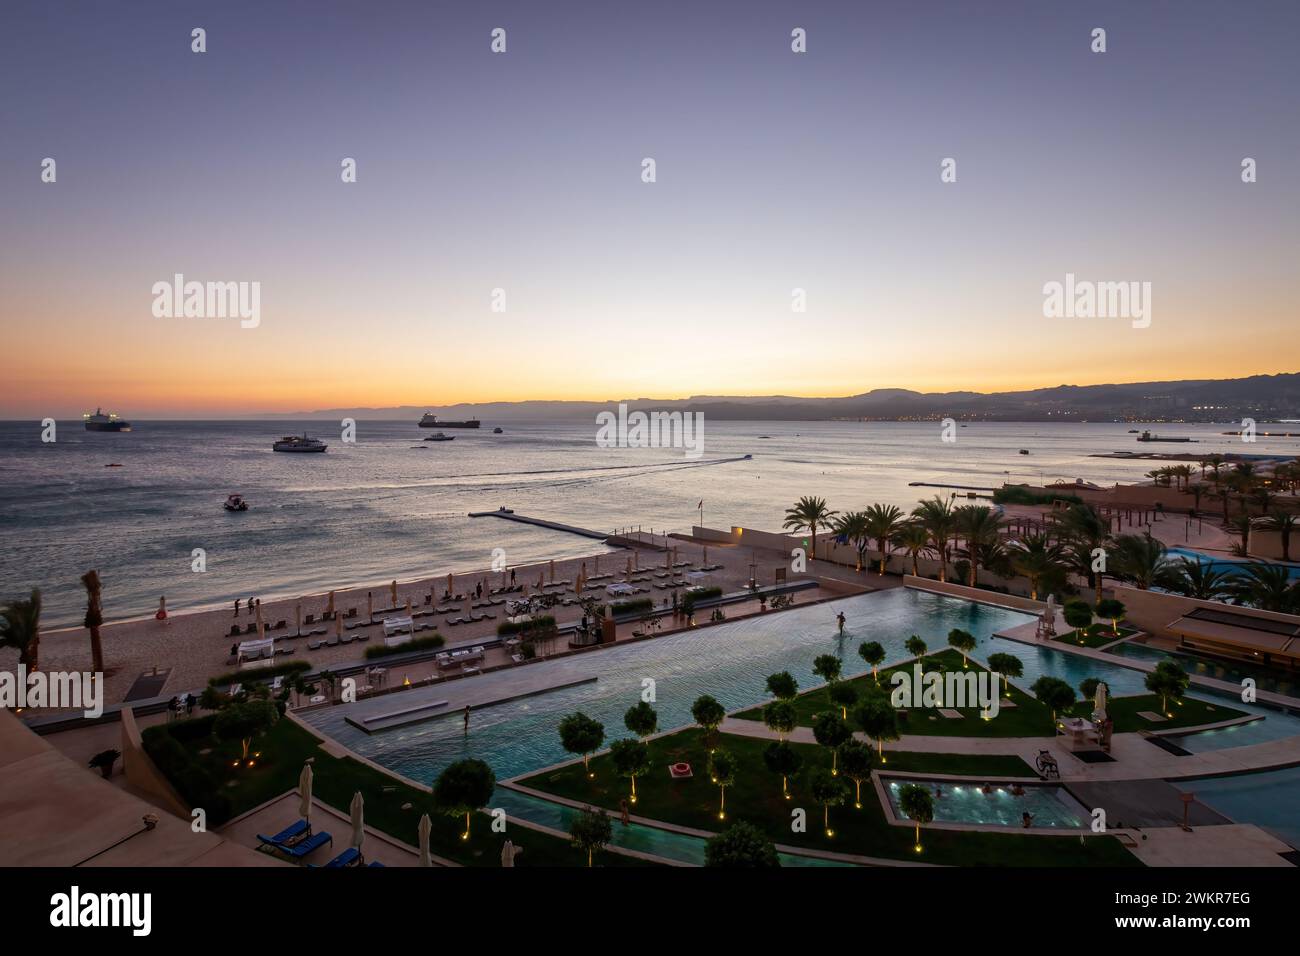 Scenic view of swimming pool and beach at Gulf of Aqaba in Aqaba, Jordan at sunset Stock Photo